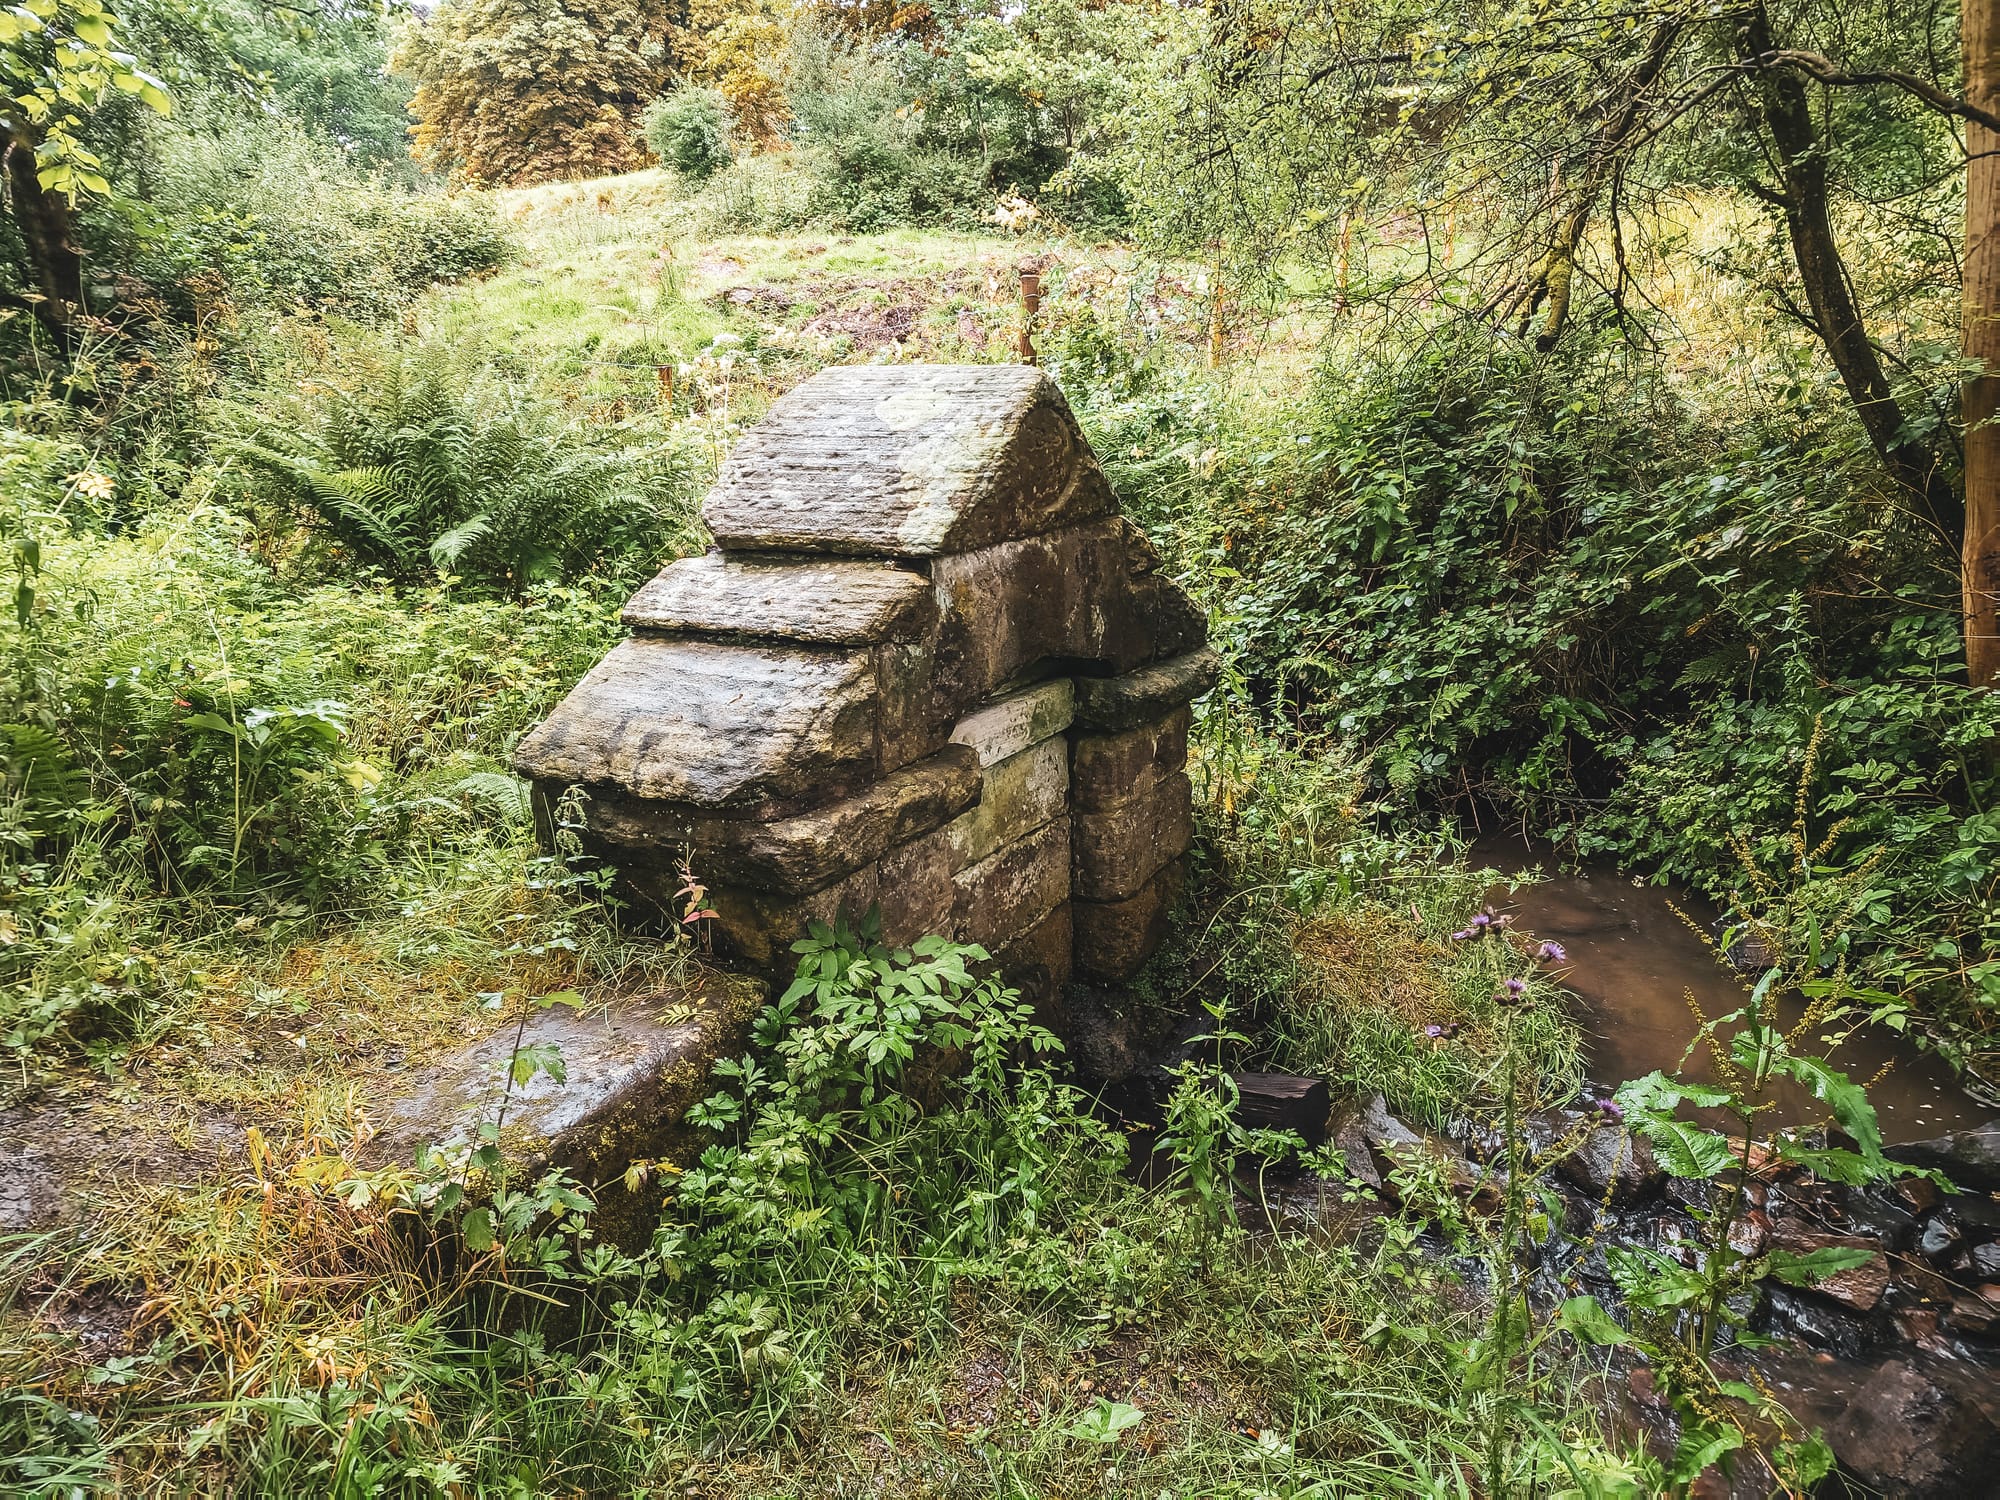 Ladydale Well, Leek: From Ancient Pilgrimages to Modern Preservation